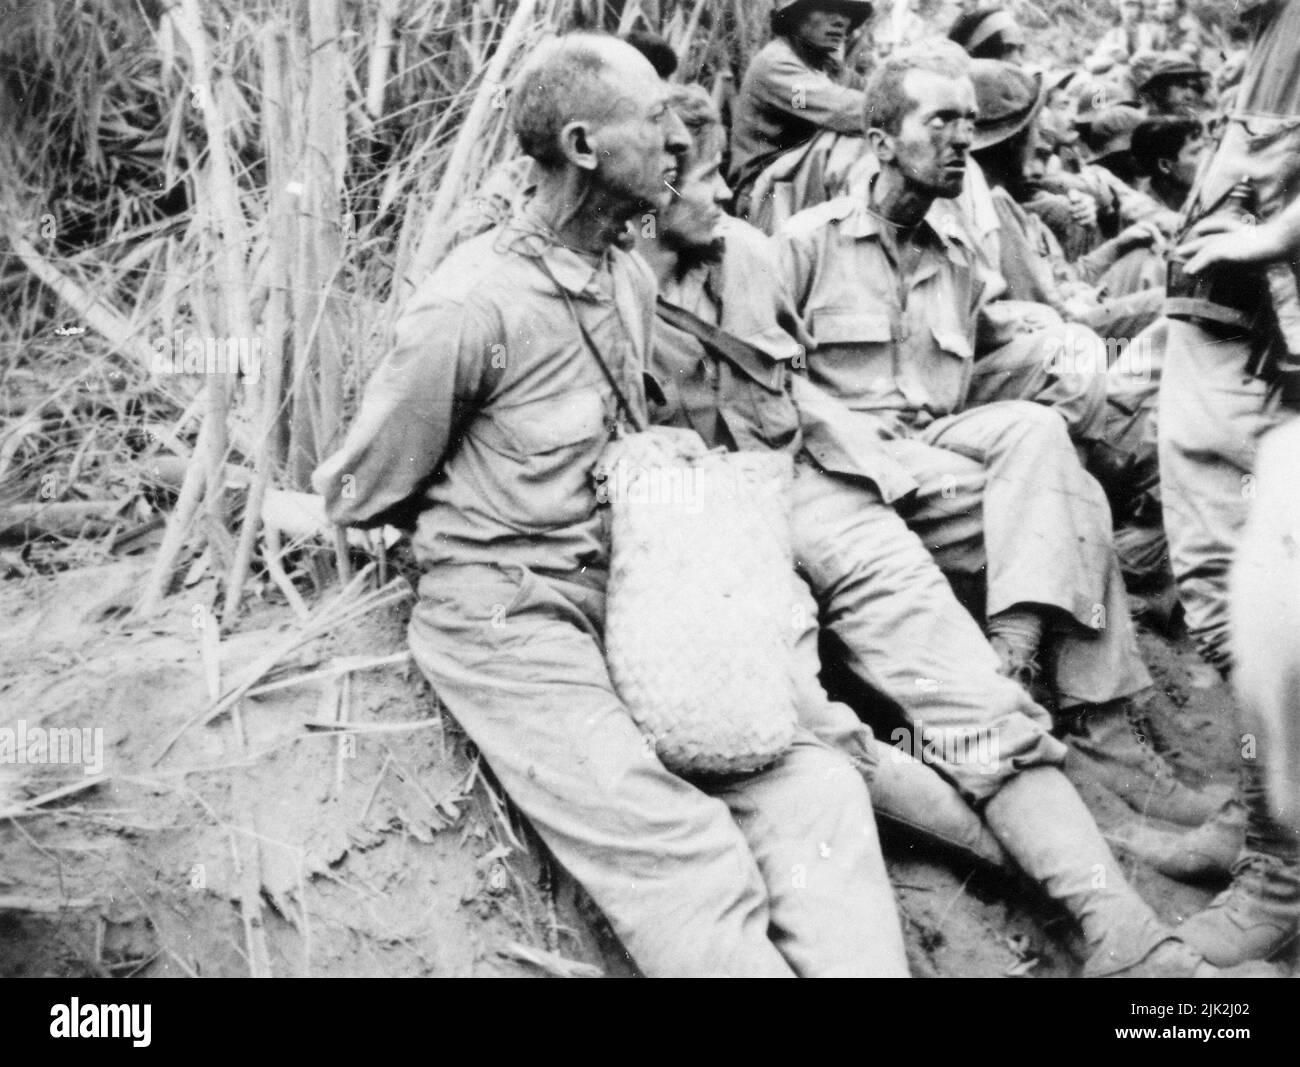 On the Bataan Death March these prisoners have their hands tied behind their backs. The March of Death in the Philippines was about May 1942, from Bataan to Cabanatuan, the prison camp Stock Photo